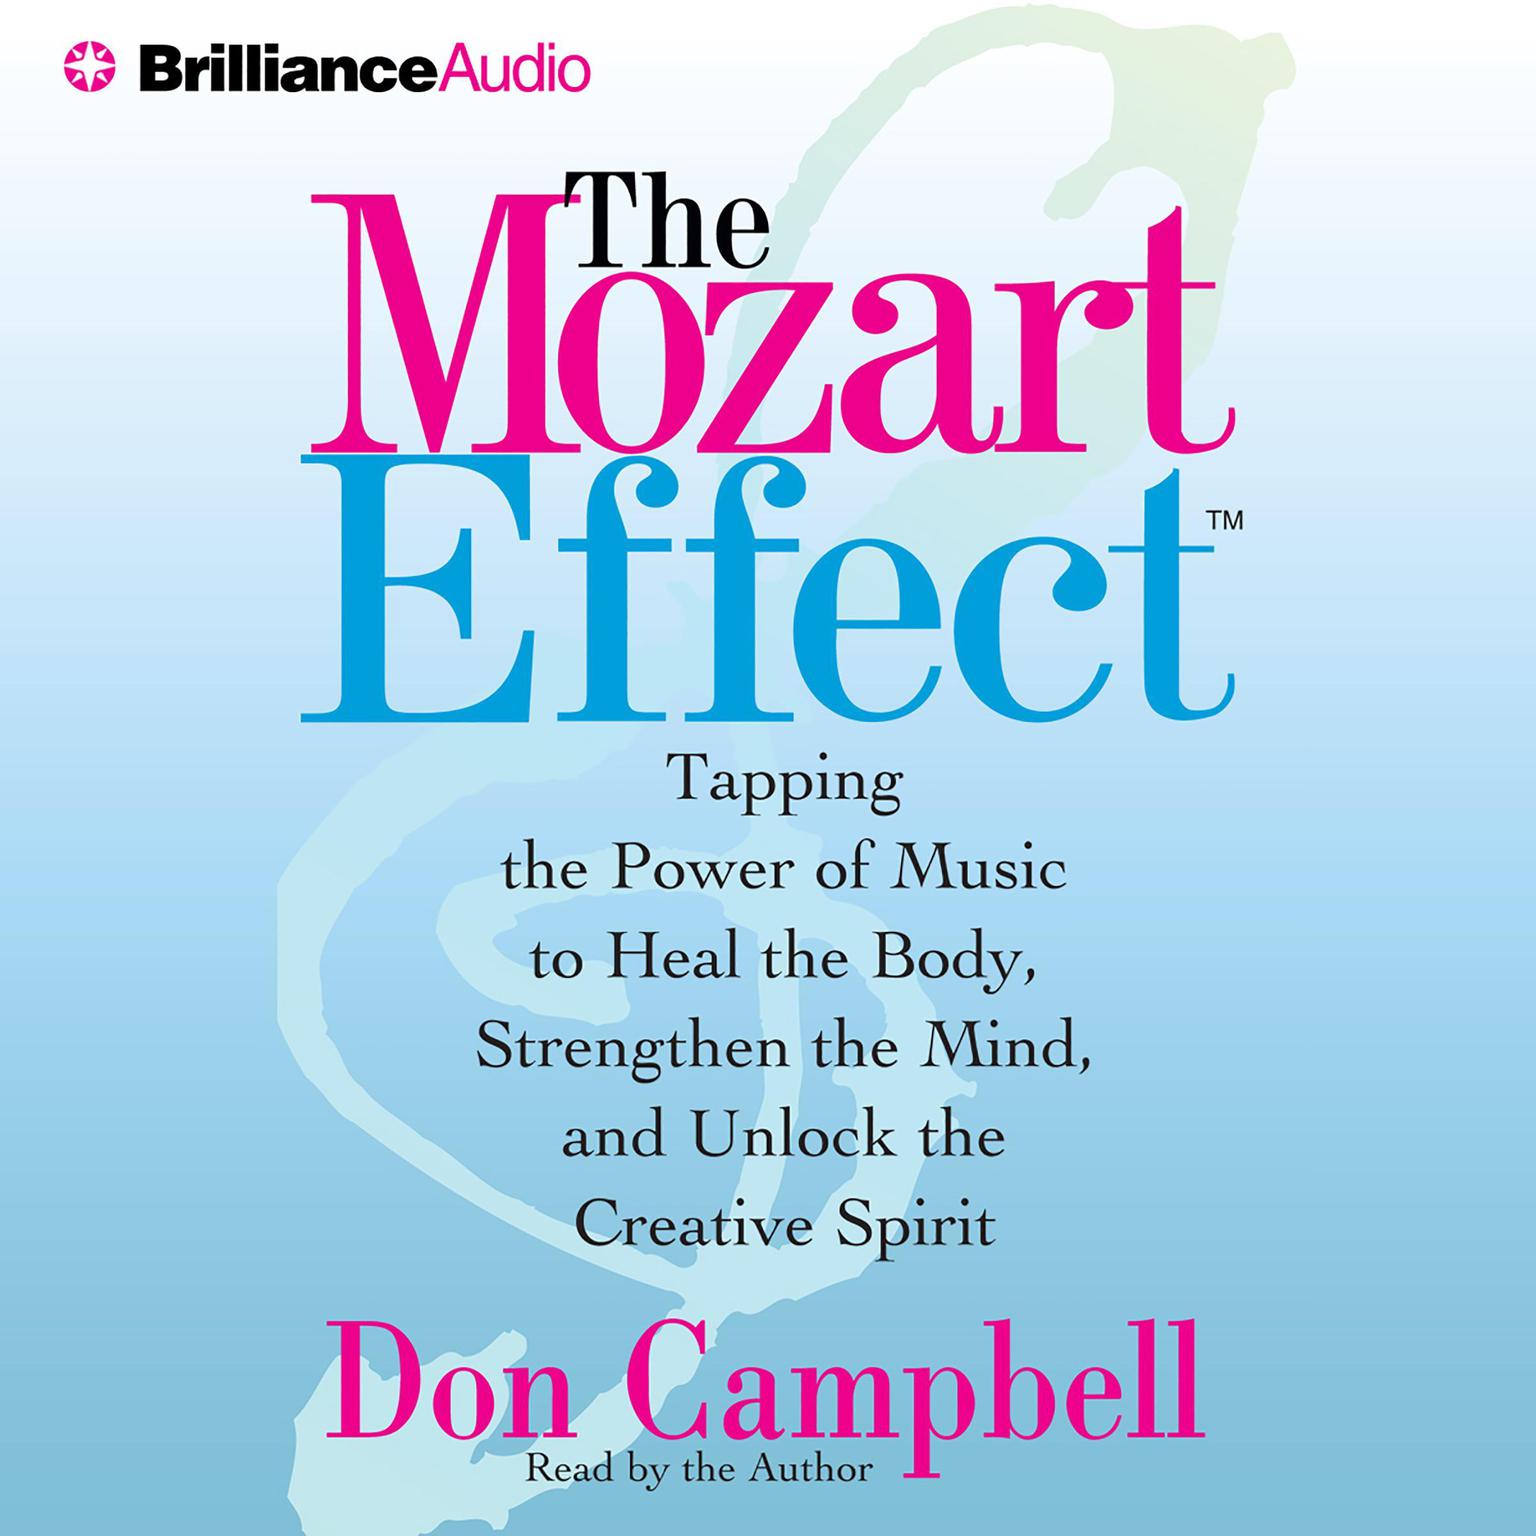 The Mozart Effect (Abridged): Tapping the Power of Music to Heal the Body, Stregthen the Mind, and Unlock the Creative Spirit Audiobook, by Don Campbell